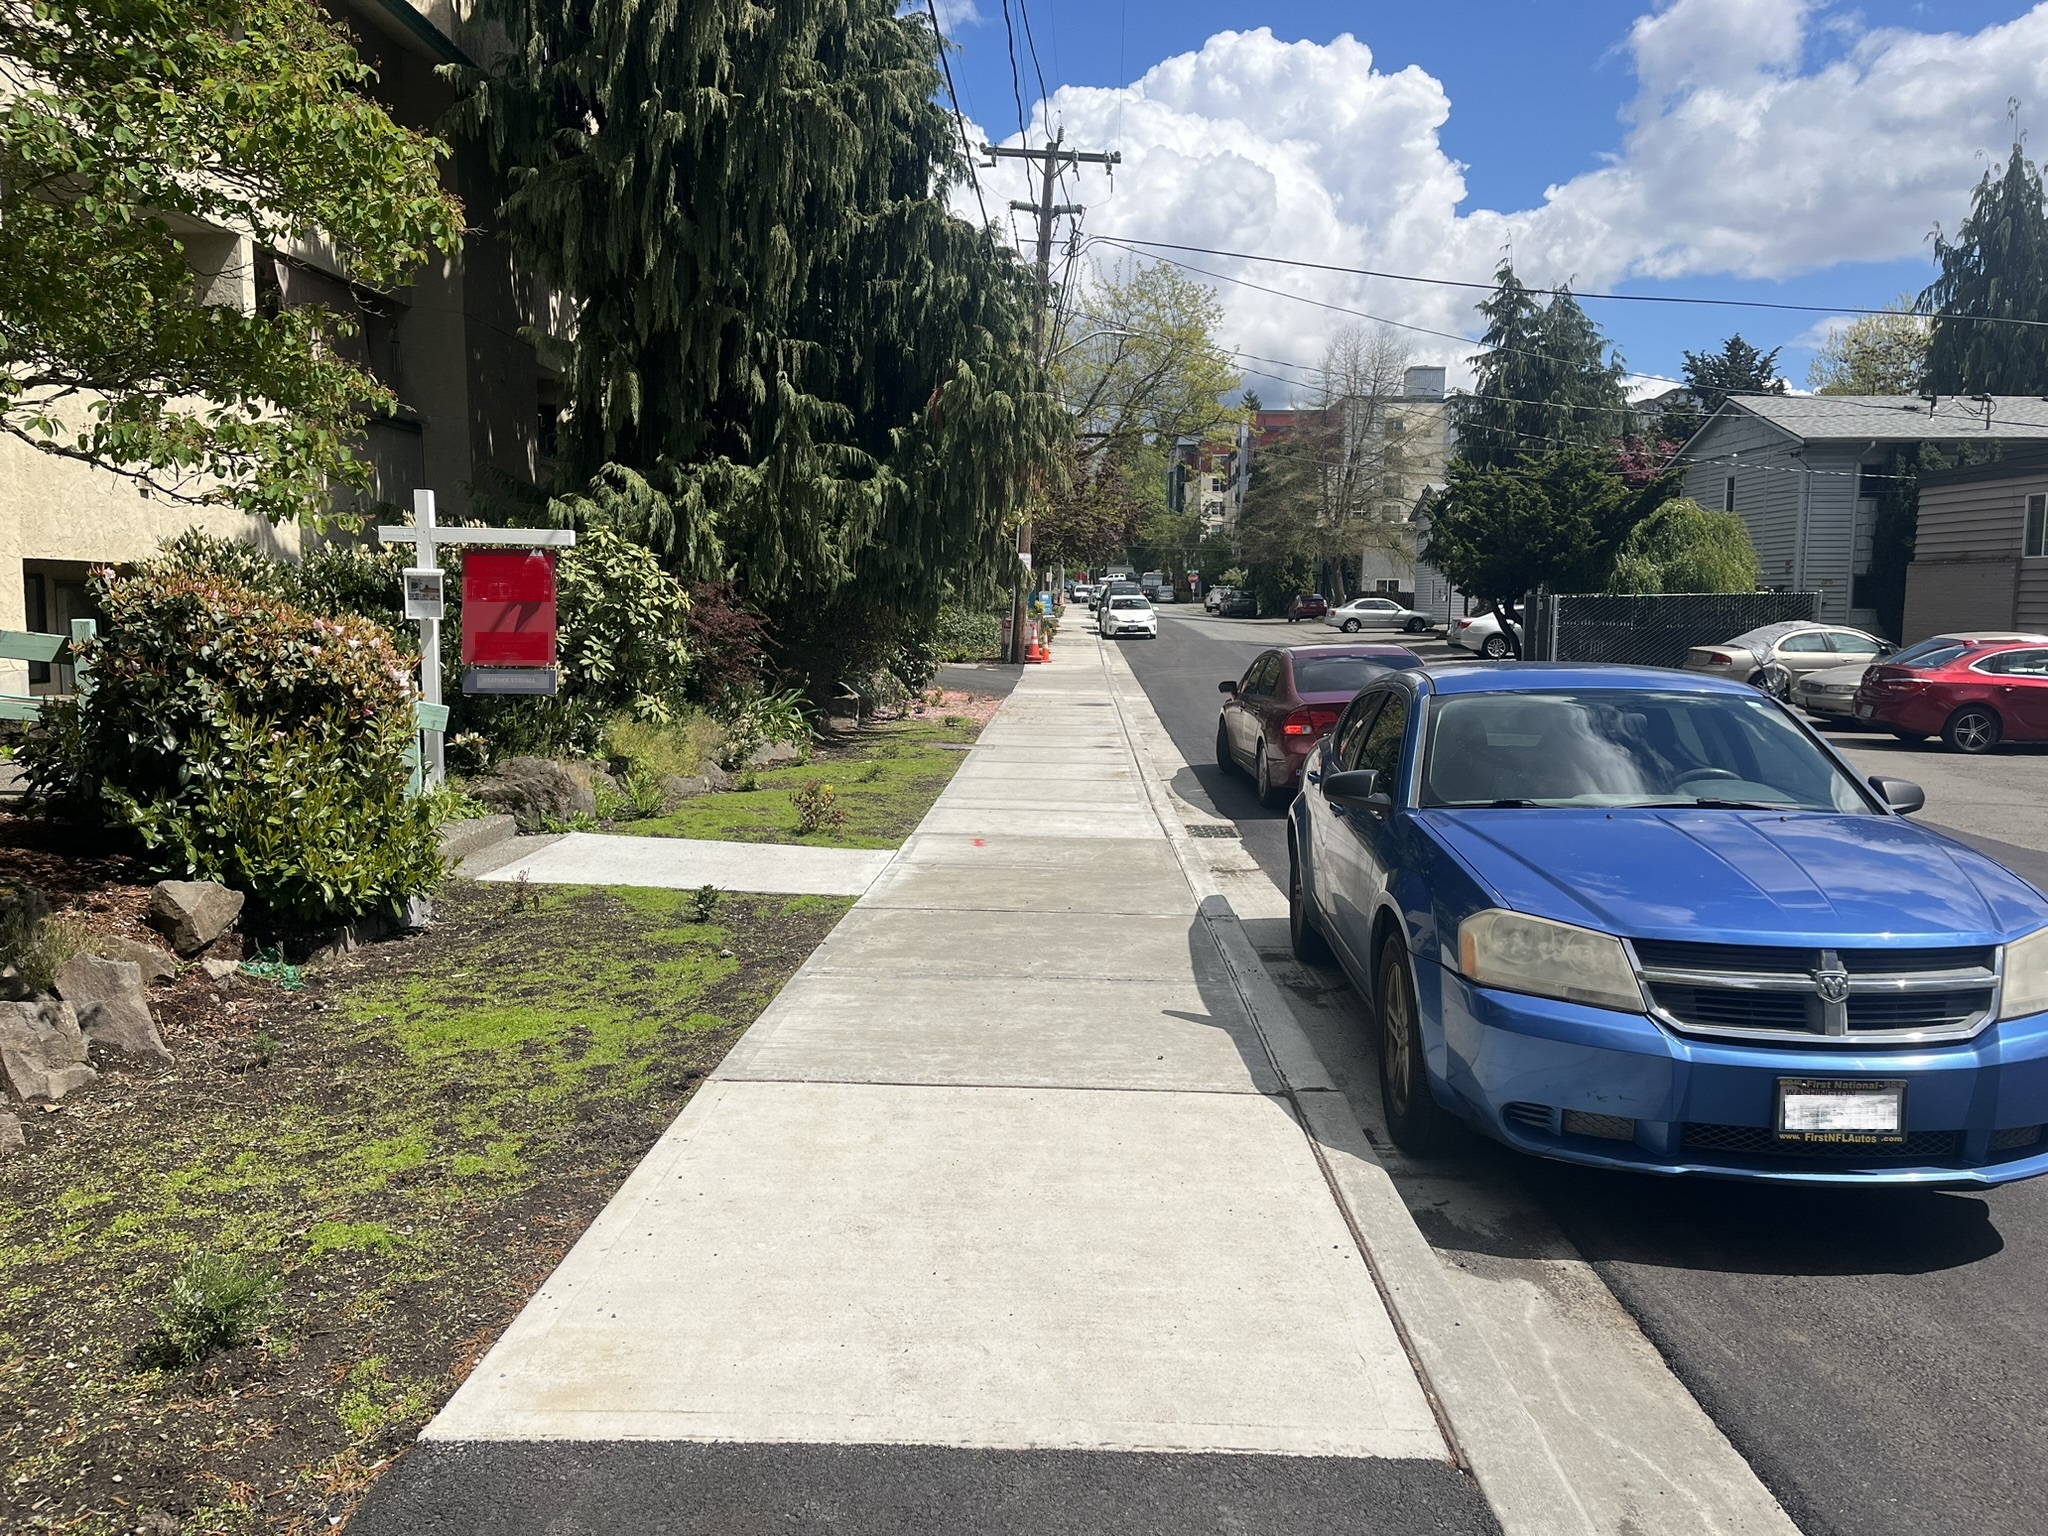 Photo shows the new sidewalk on the north side of NE 143rd St, between 30th Ave NE and 32nd Ave NE looking east